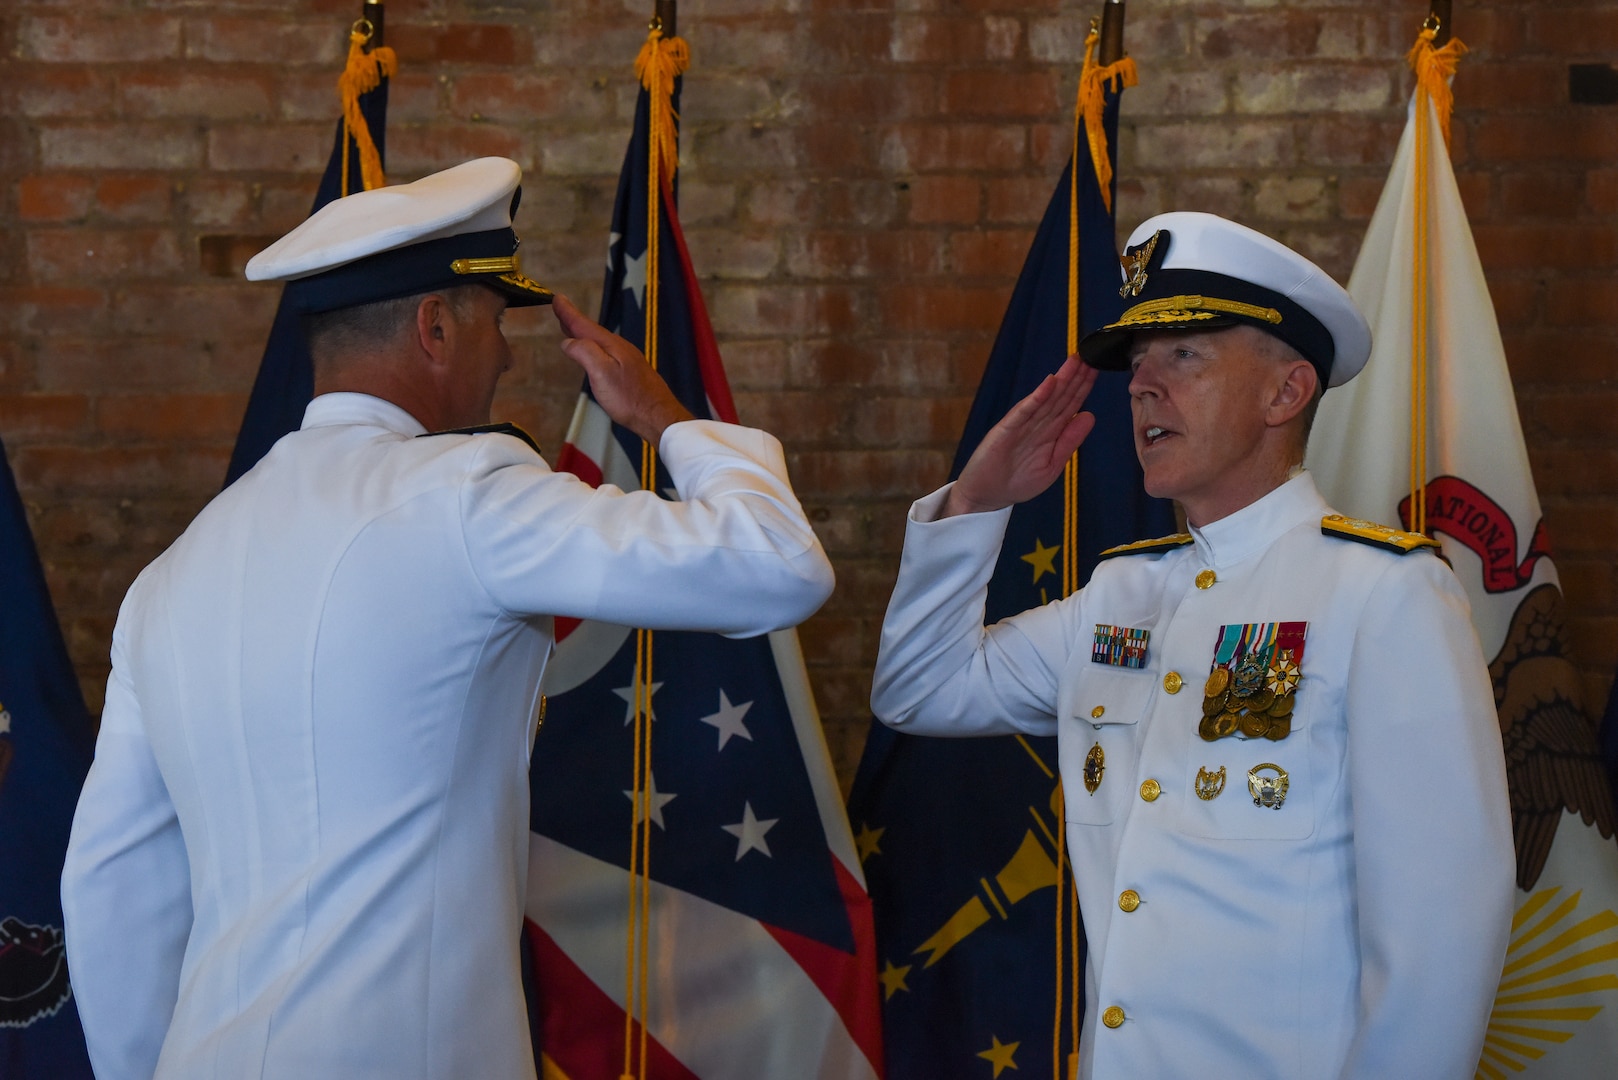 Two individuals saluting